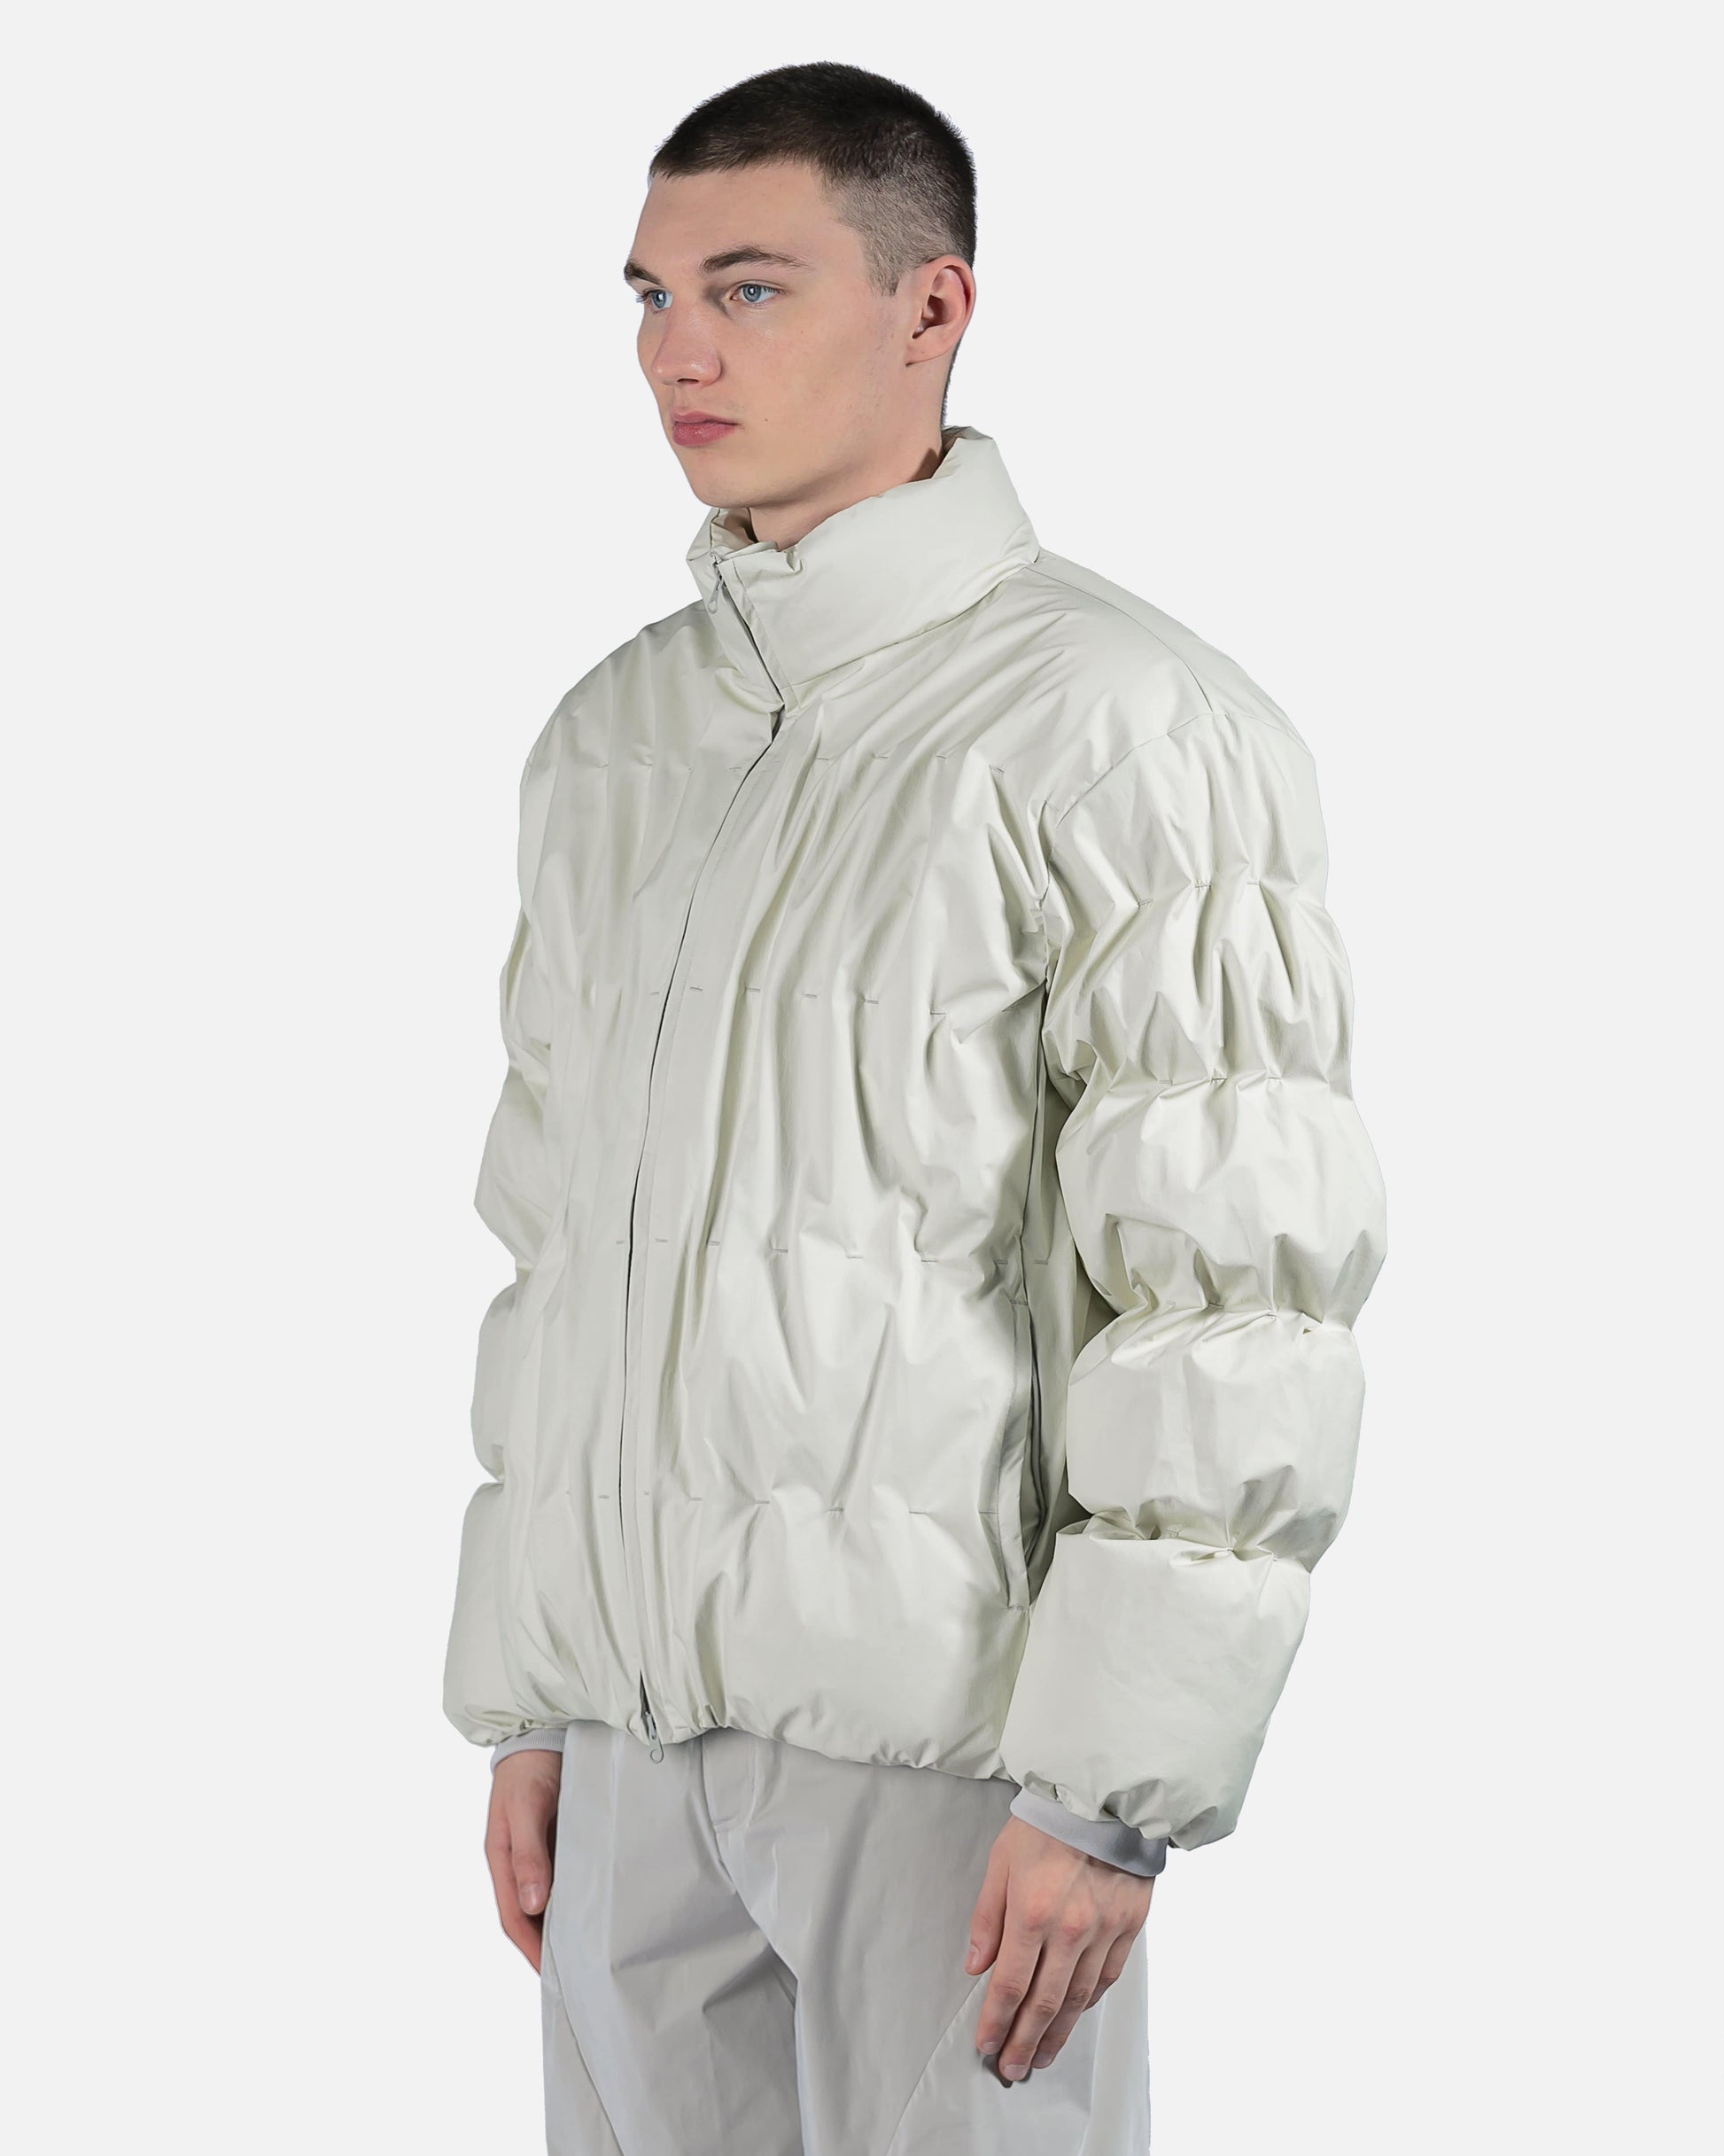 POST ARCHIVE FACTION (P.A.F) Men's Jackets 4.0+ Down Right Puffer Jacket in Light Grey